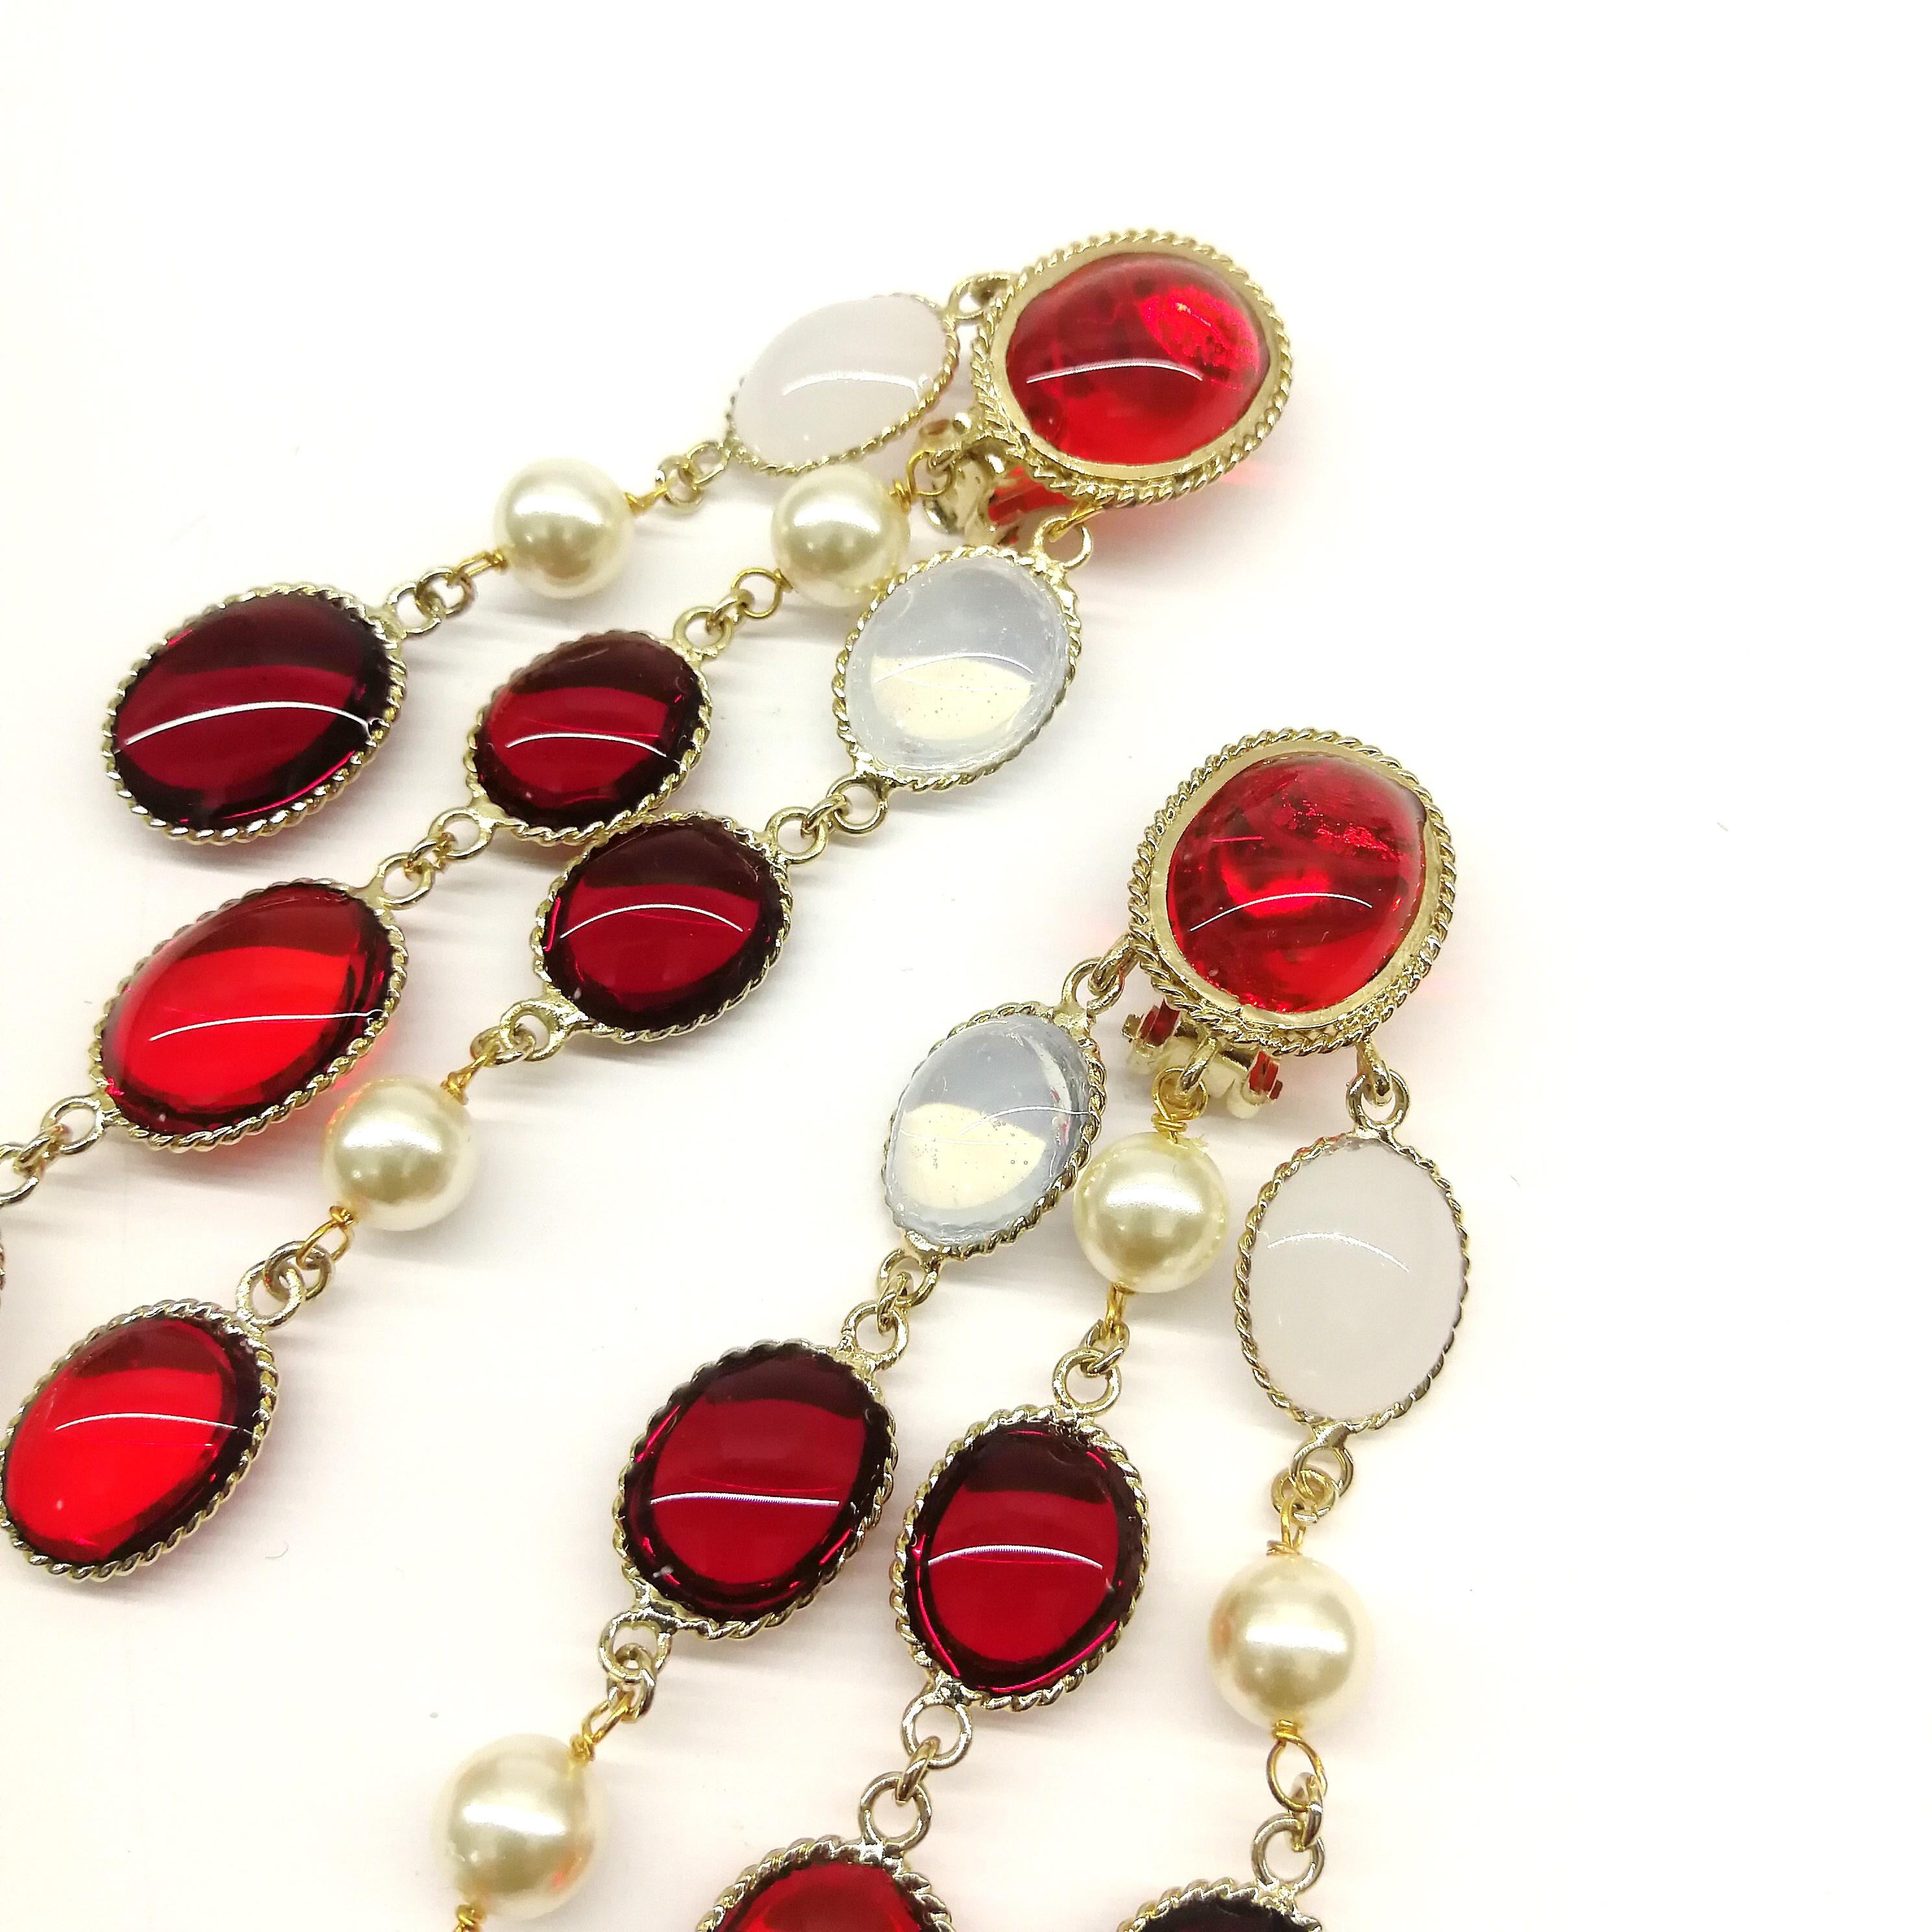 Women's 'WW' mixed ruby and opaline poured glass, 'Harlequin' drop earrings, 2018. For Sale